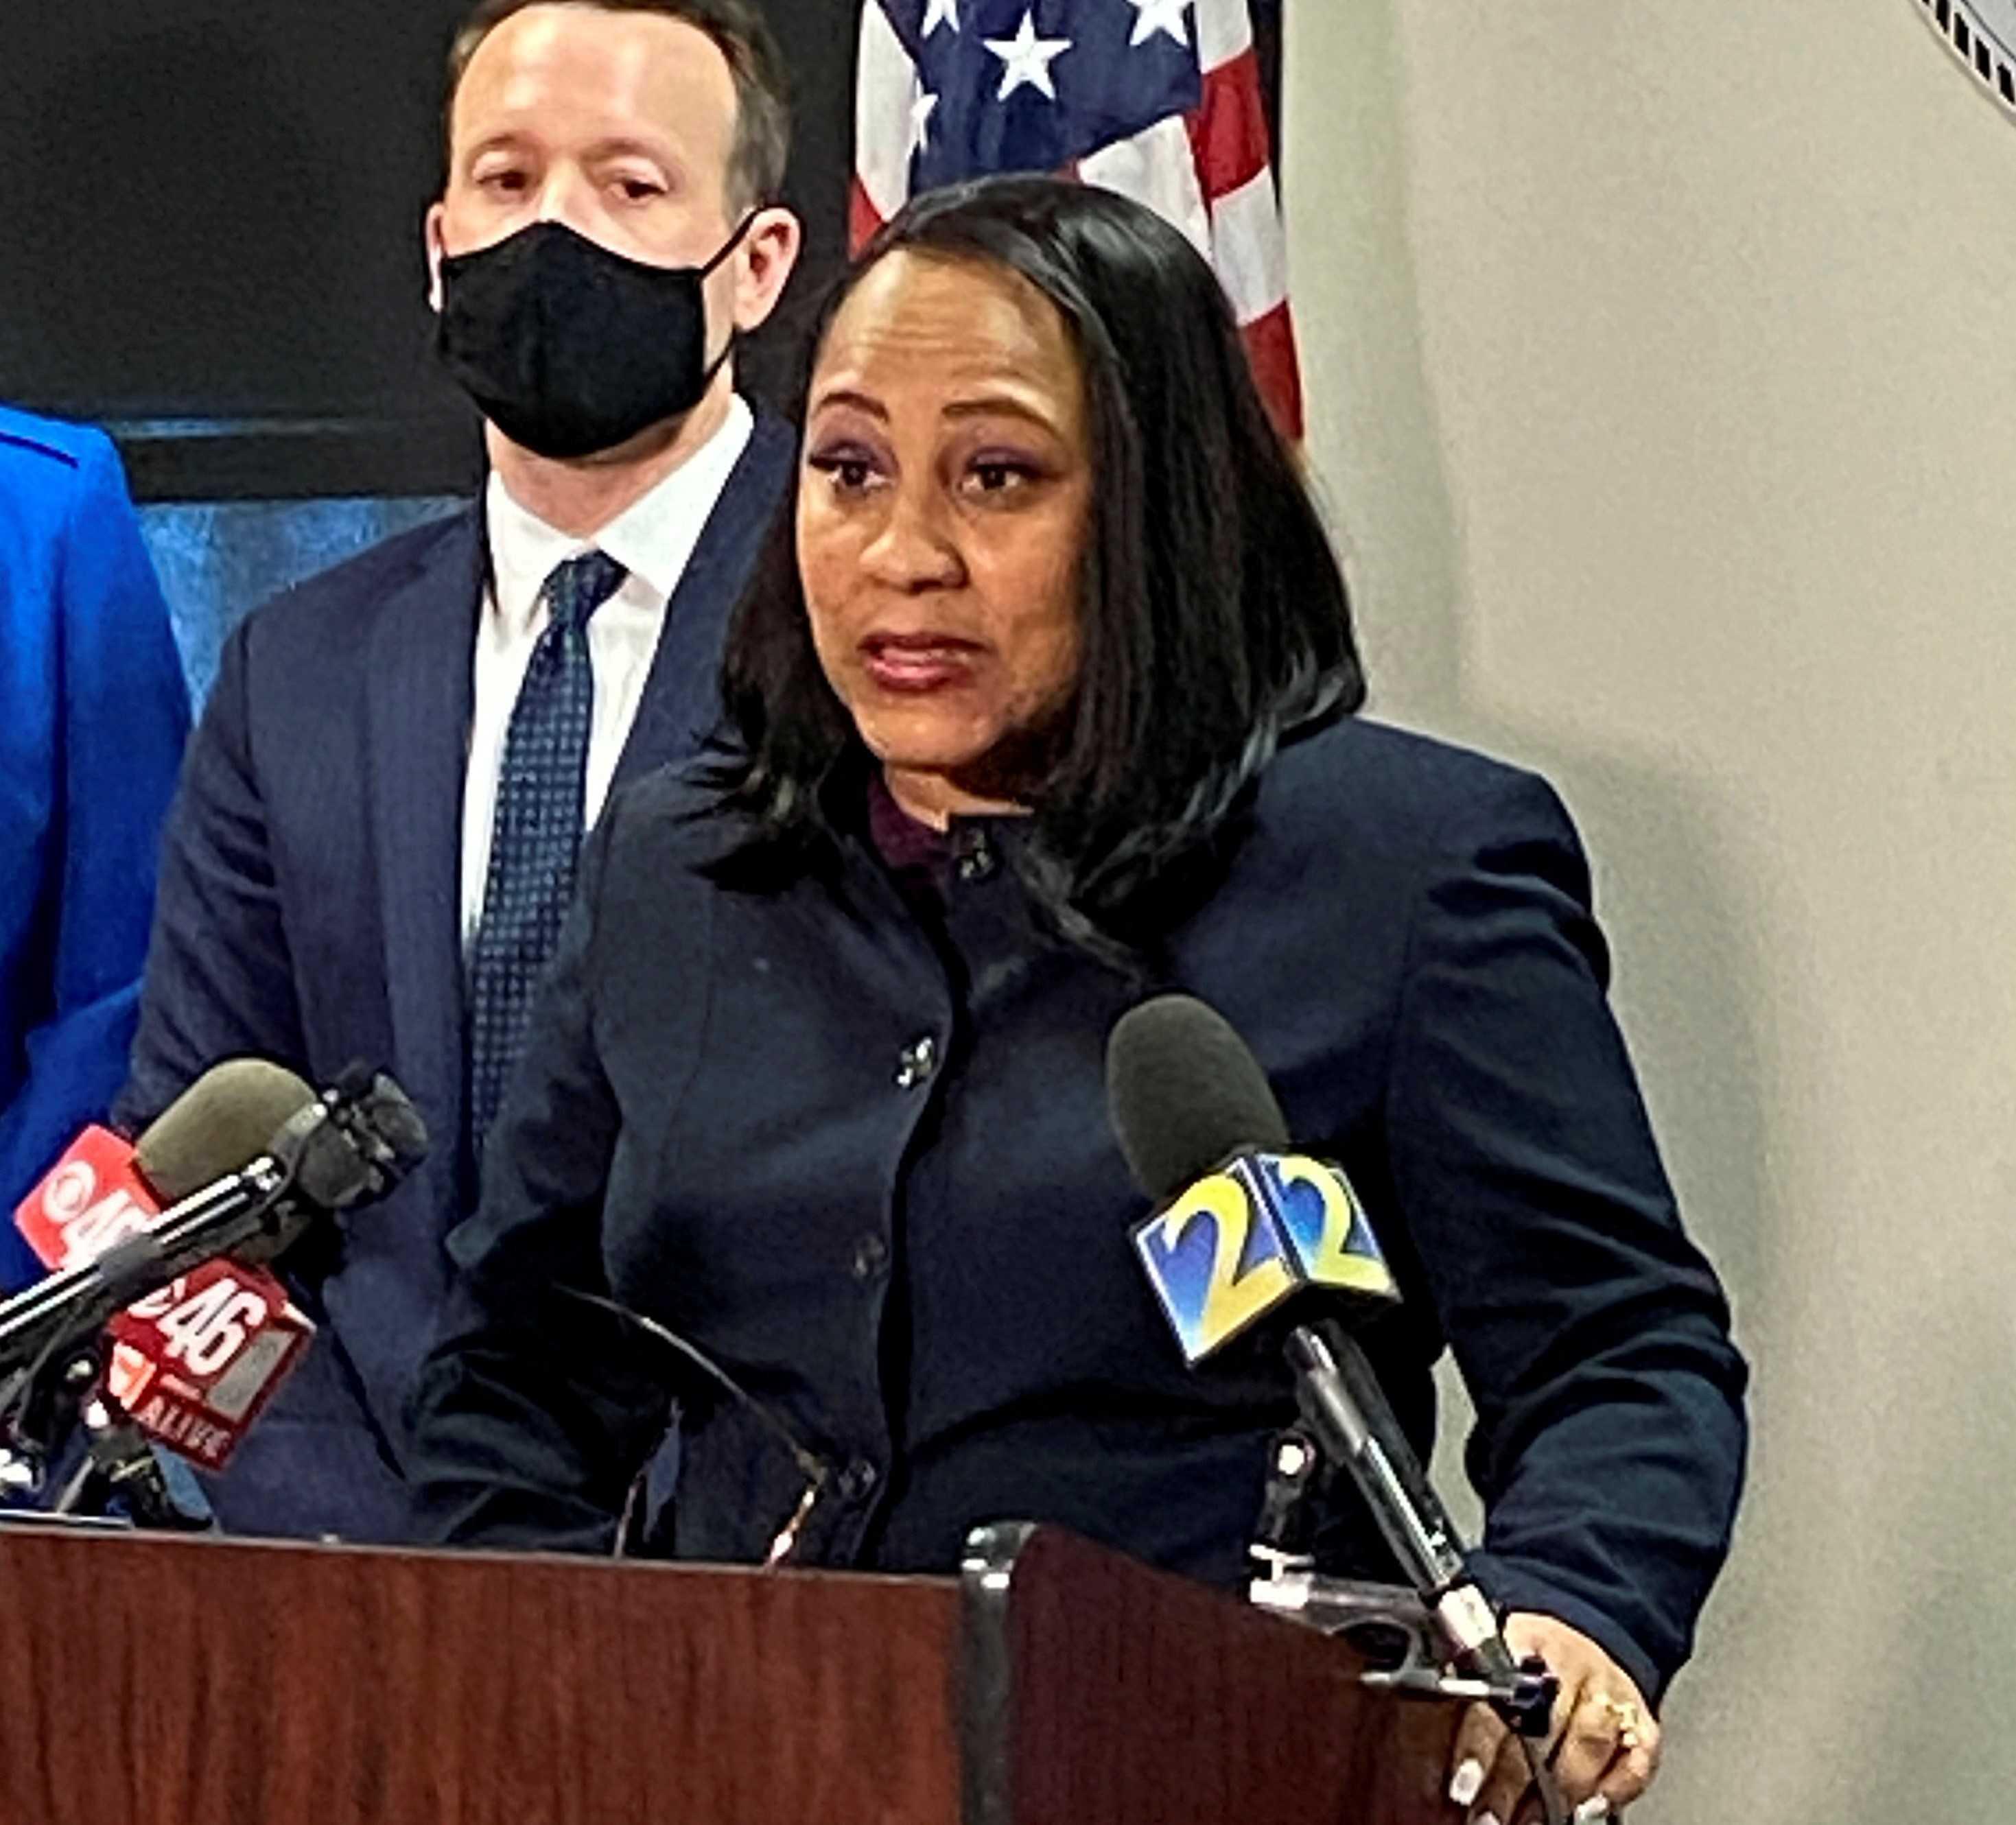 Fulton County District Attorney Fani Willis speaks at a news conference in Atlanta, Georgia, US, May 11, 2021. Photo: Reuters